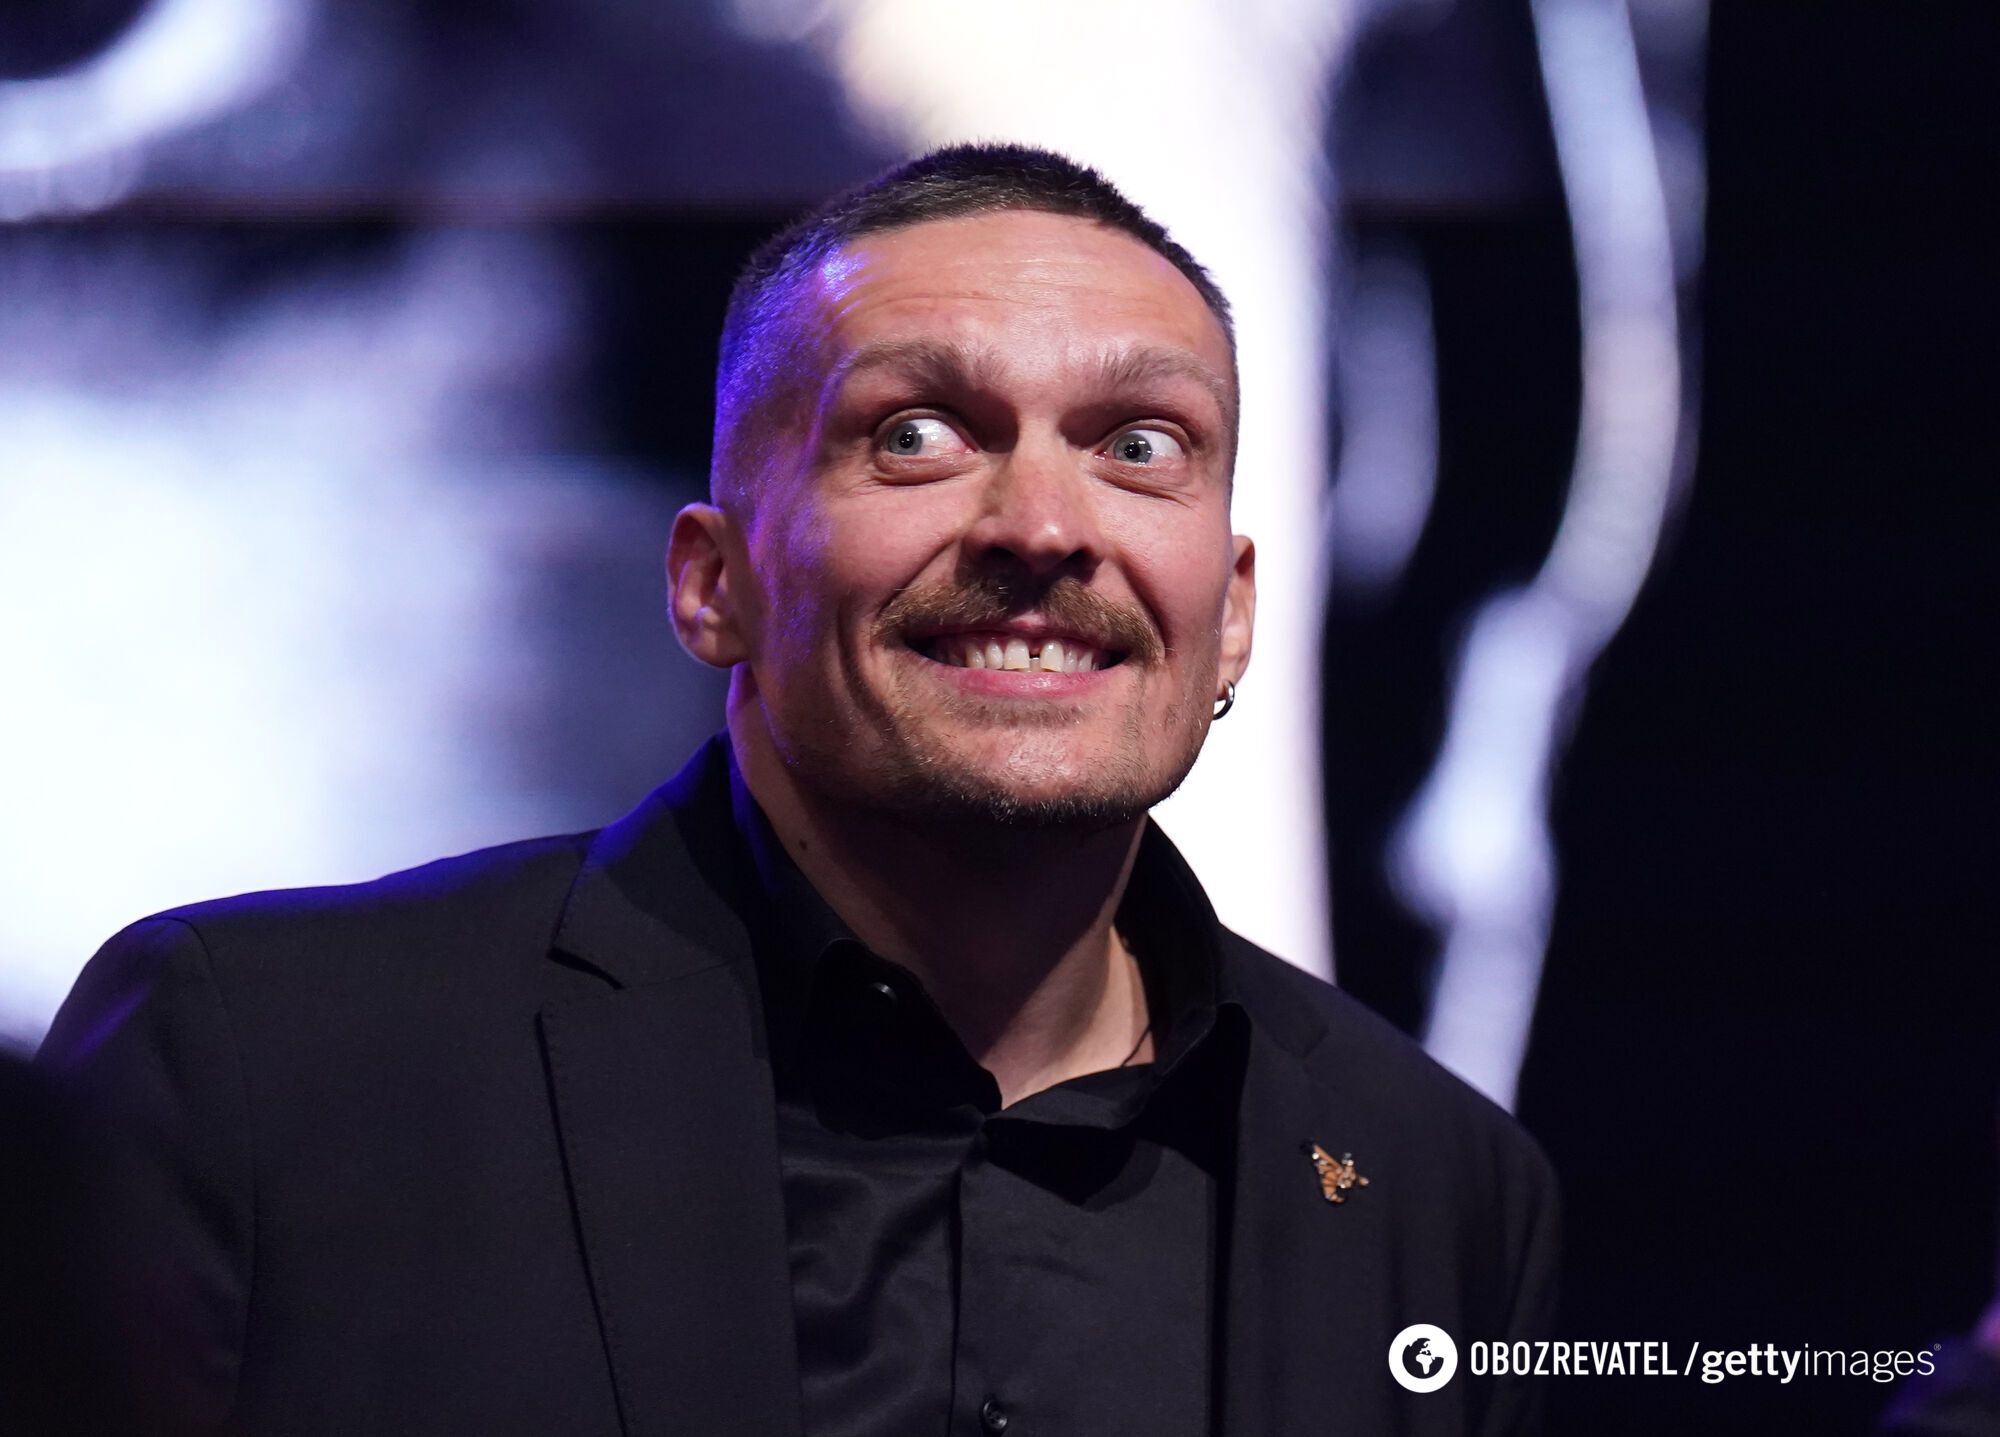 WBC appointed an opponent for the winner of the Usyk-Joshua fight